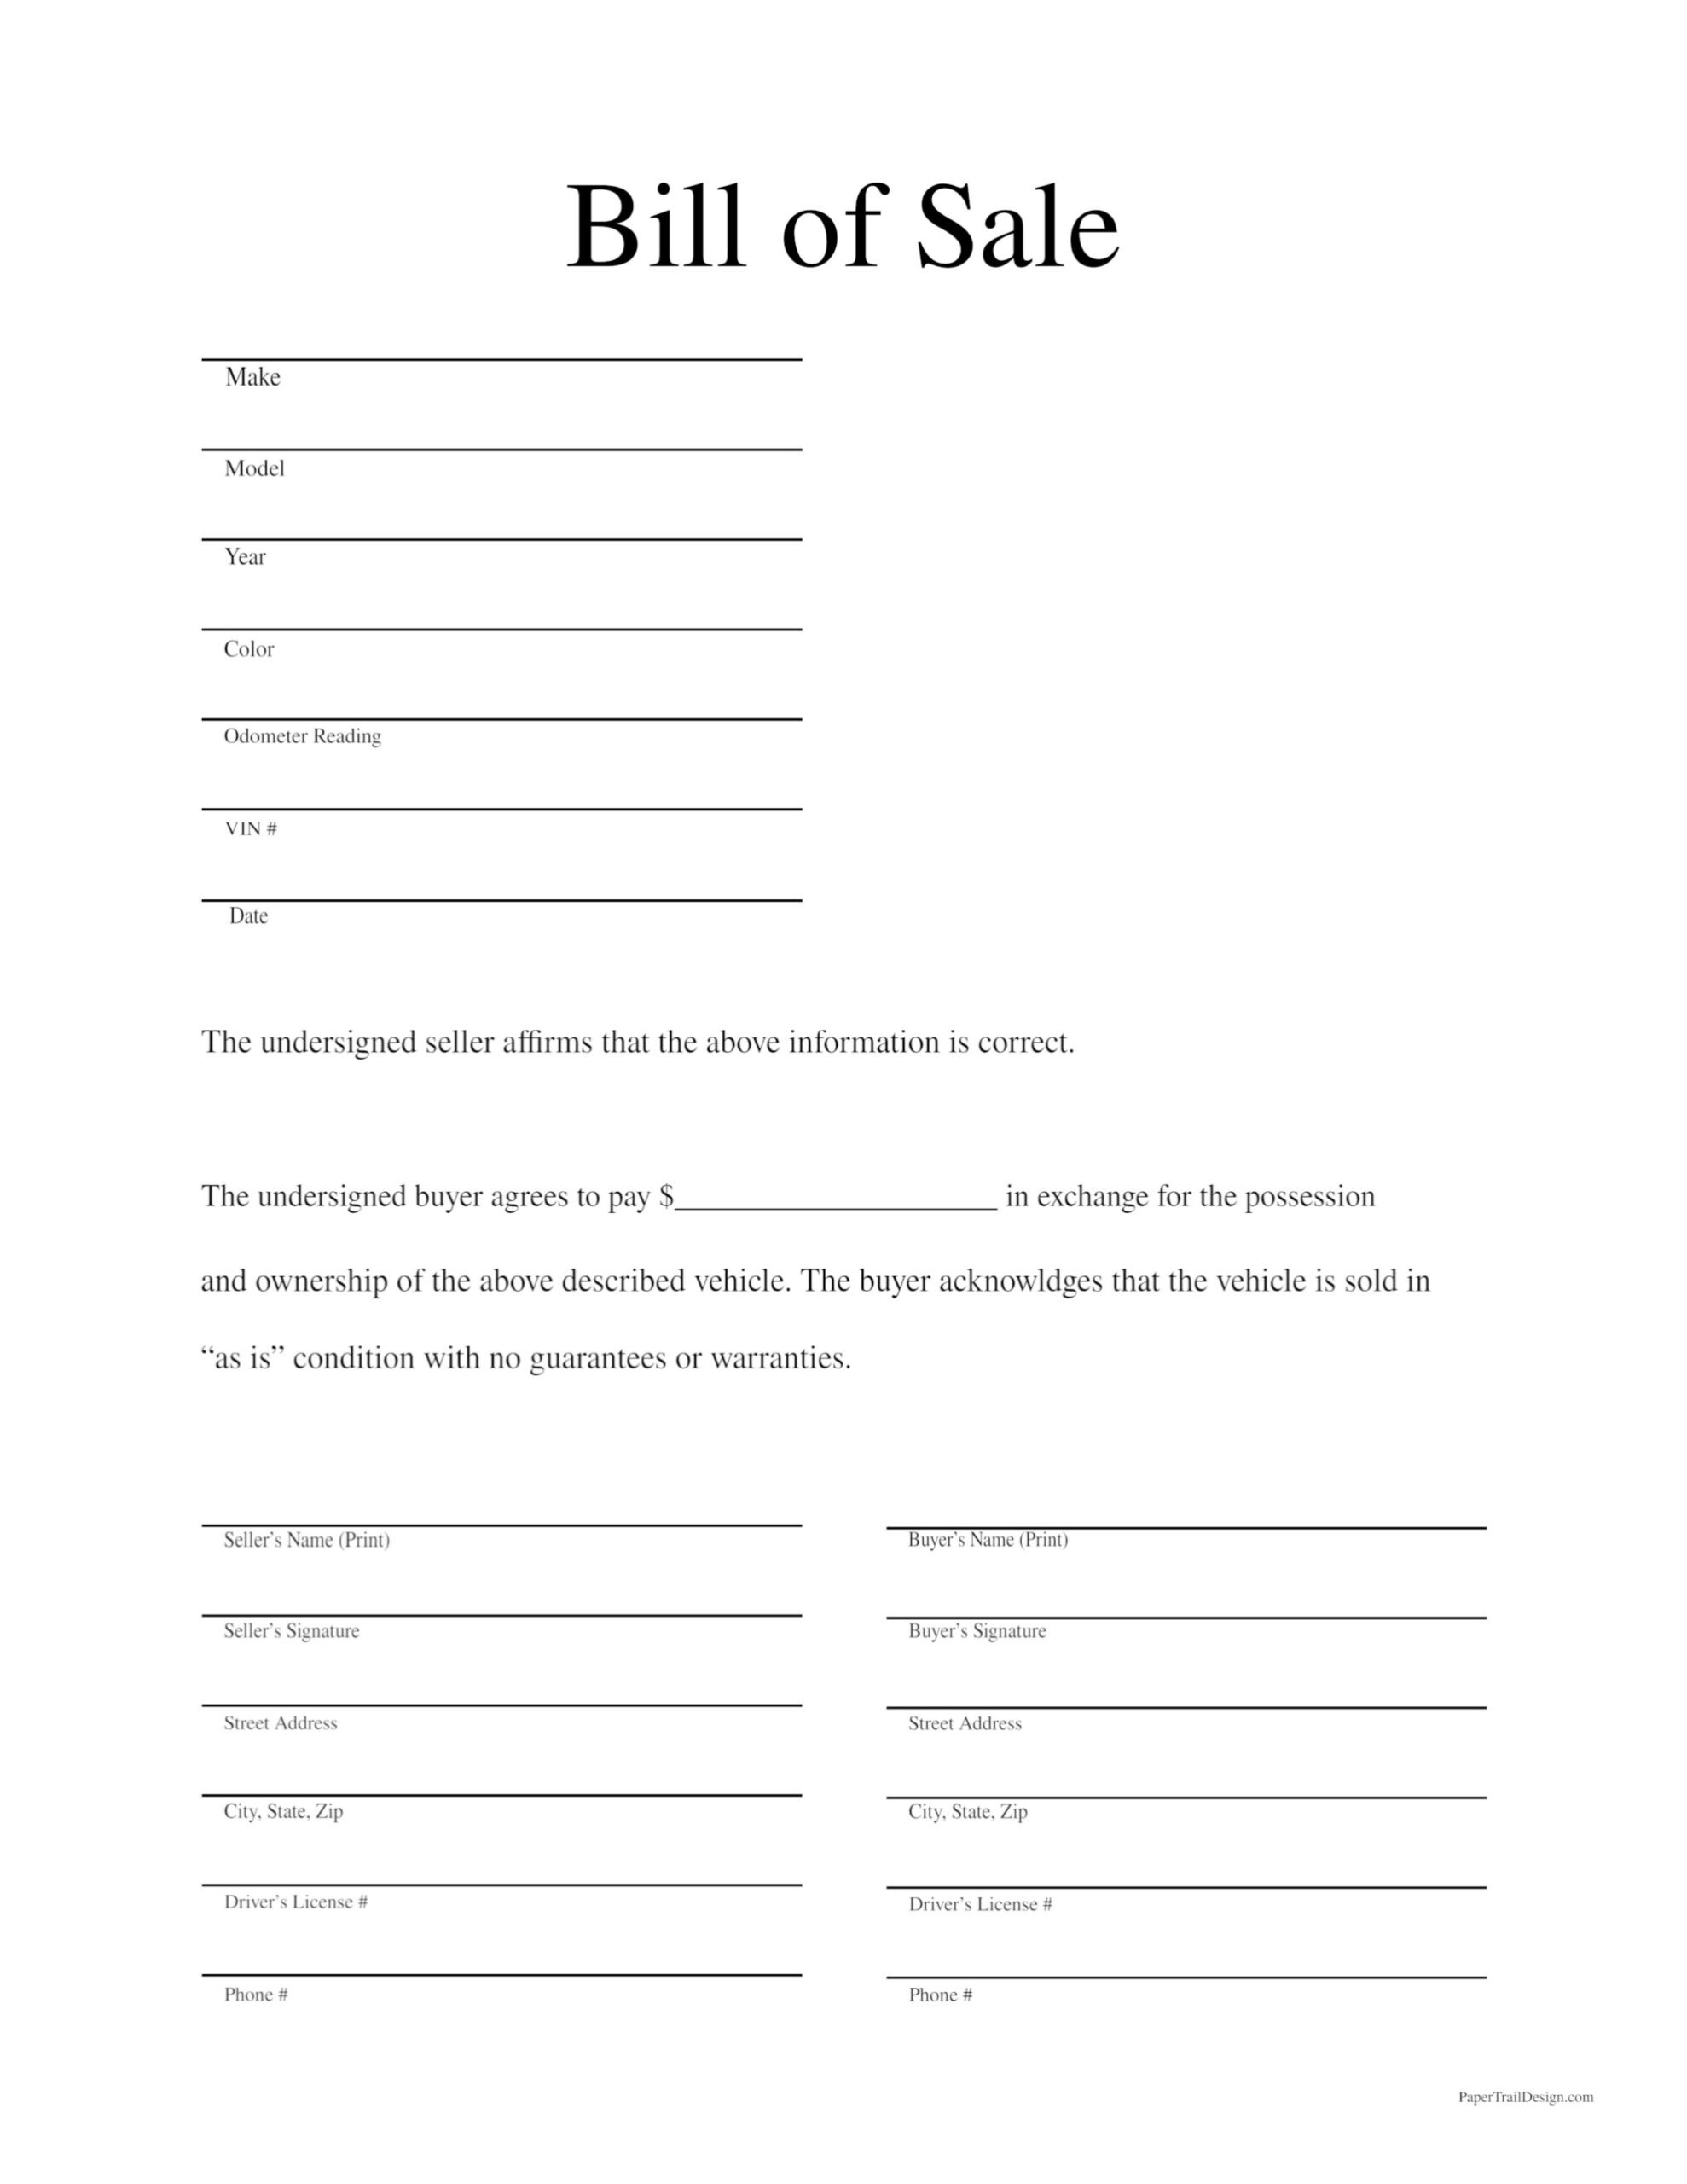 Free Printable Bill Of Sale Template - Paper Trail Design inside Free Printable Bill Of Sale Form